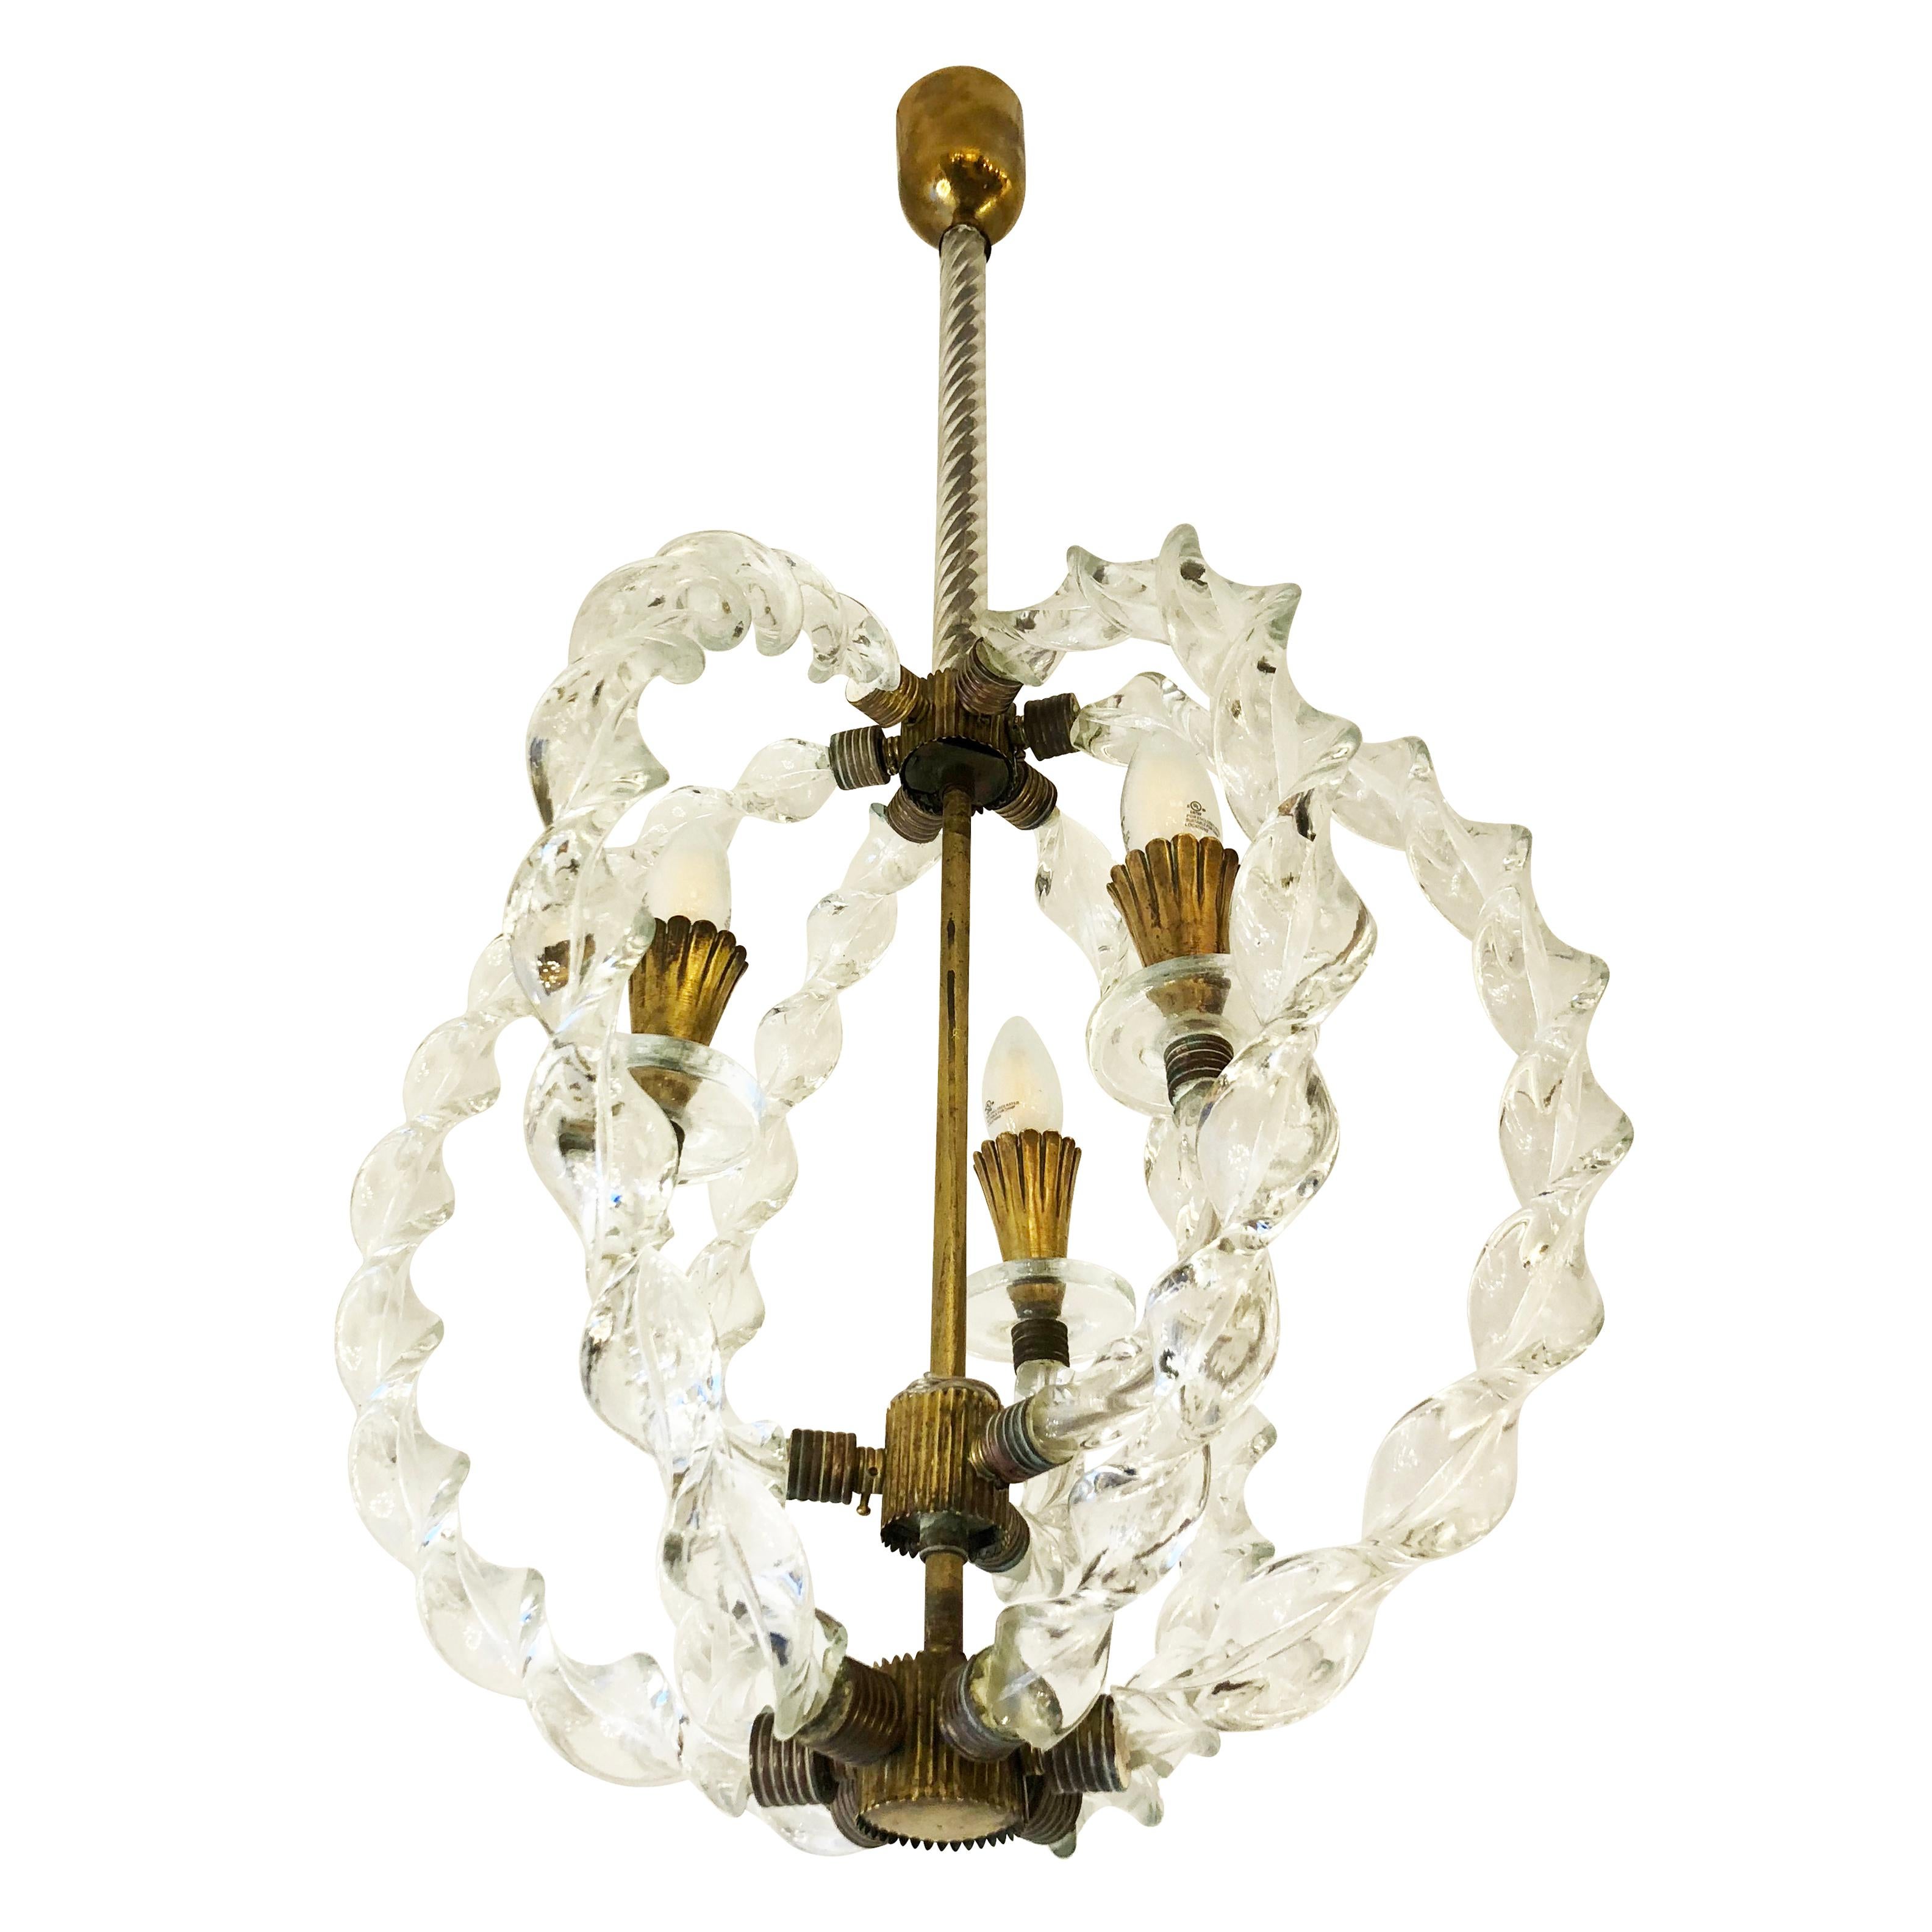 1940s pendant attributed to Seguso. Six Murano glass braids encircle three arms ending with the light sources. Brass fittings. Holds three E12 sockets.

Condition: Excellent vintage condition, minor wear consistent with age and use

Measures: